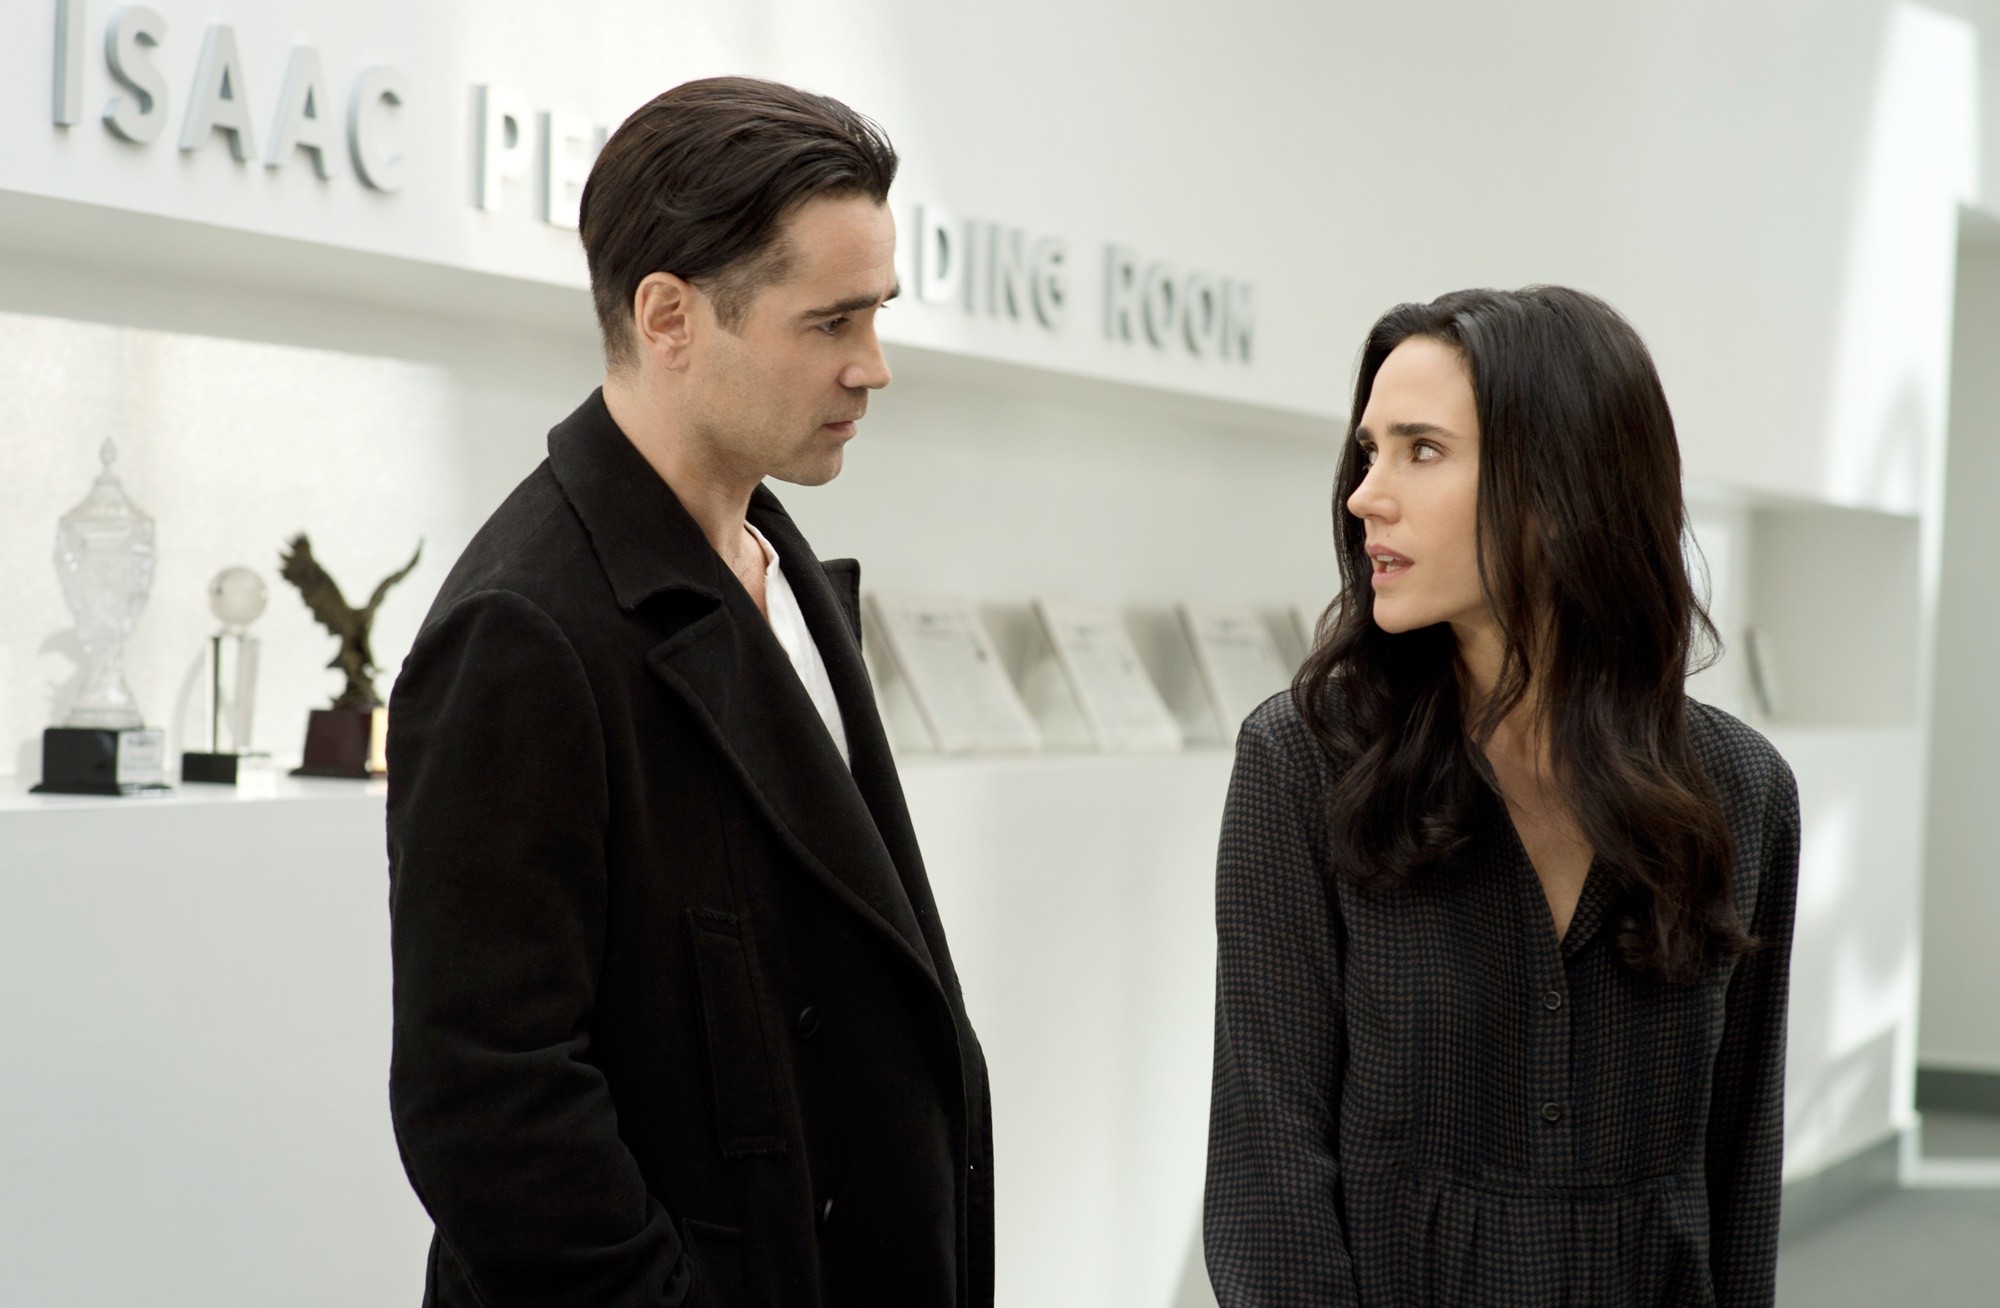 Colin Farrell stars as Peter Lake and Jennifer Connelly stars as Virginia Gamely in Warner Bros. Pictures' Winter's Tale (2014)